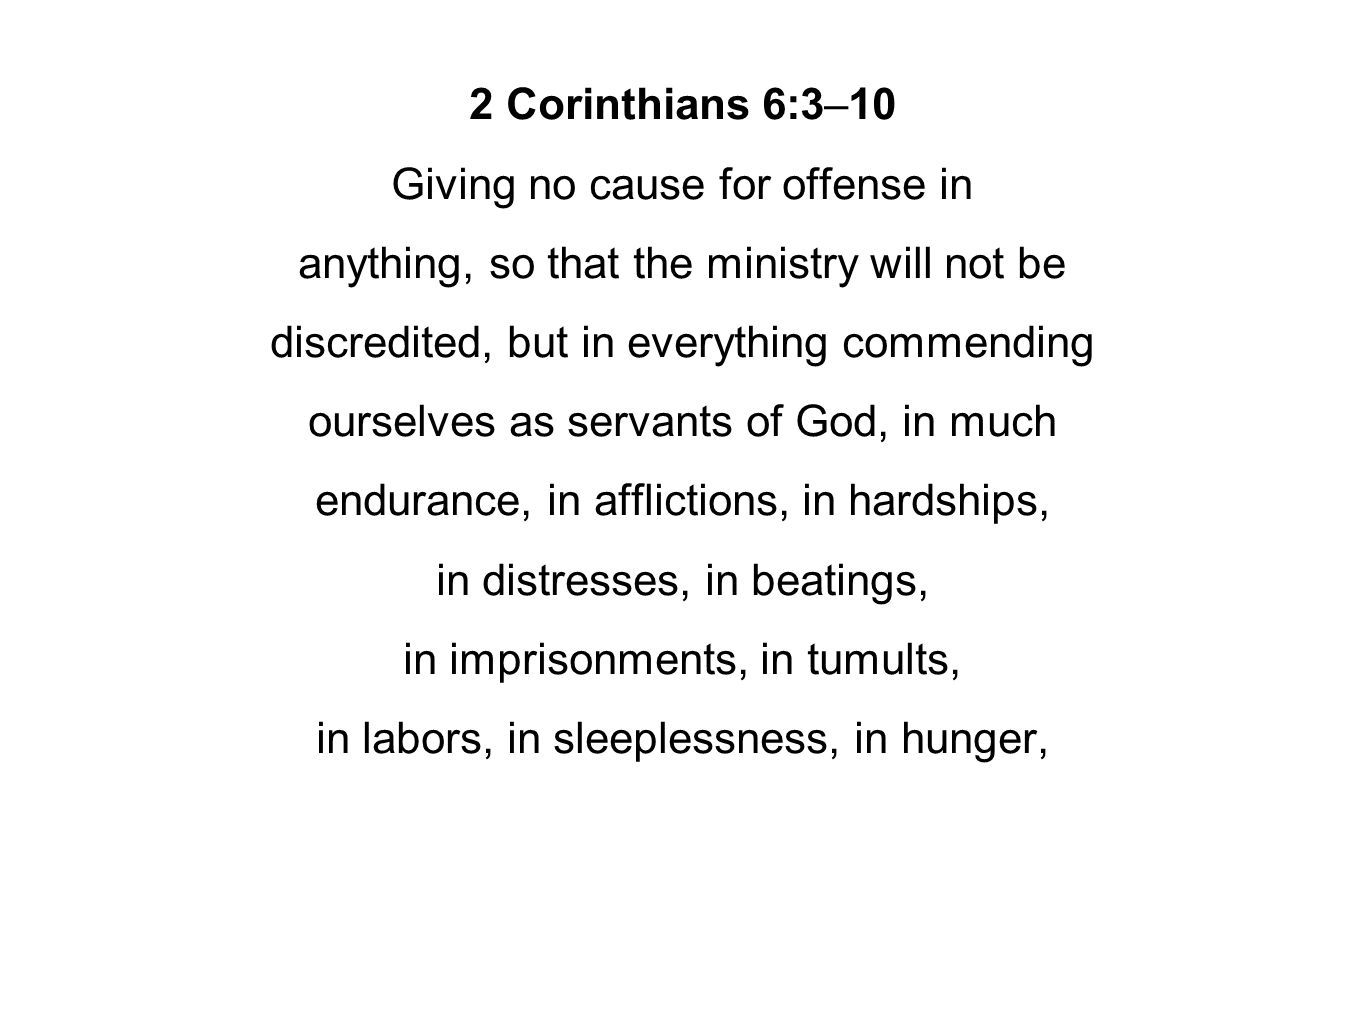 2 Corinthians 6:3–10 Giving no cause for offense in anything, so that the ministry will not be discredited, but in everything commending ourselves as servants of God, in much endurance, in afflictions, in hardships, in distresses, in beatings, in imprisonments, in tumults, in labors, in sleeplessness, in hunger,